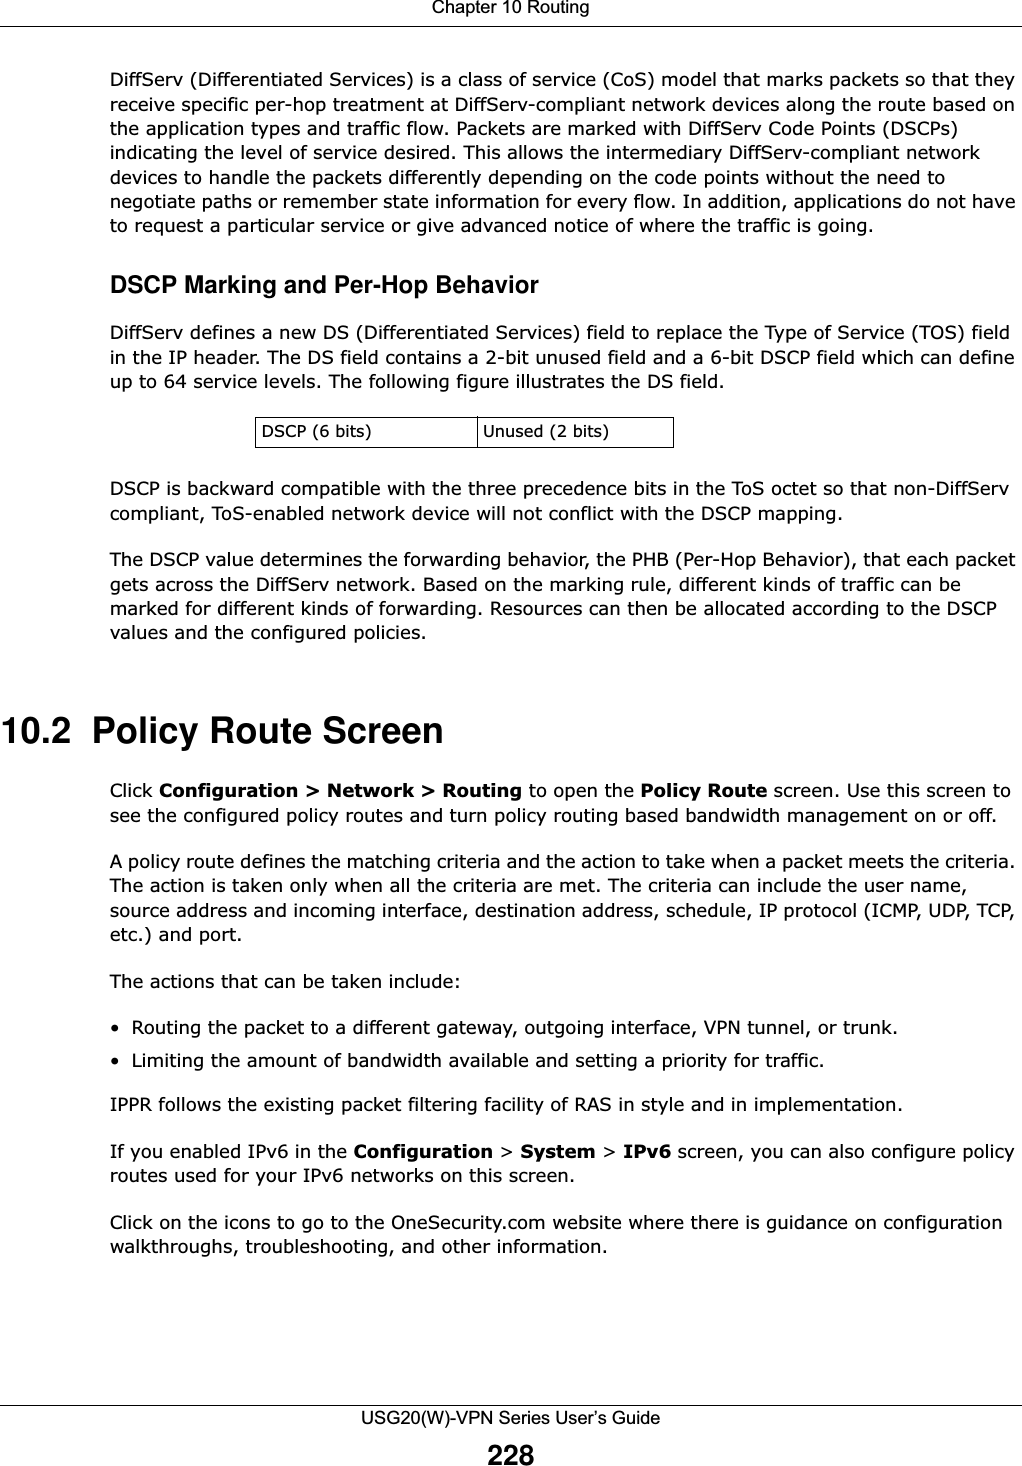 Chapter 10 RoutingUSG20(W)-VPN Series User’s Guide228DiffServ (Differentiated Services) is a class of service (CoS) model that marks packets so that they receive specific per-hop treatment at DiffServ-compliant network devices along the route based on the application types and traffic flow. Packets are marked with DiffServ Code Points (DSCPs) indicating the level of service desired. This allows the intermediary DiffServ-compliant network devices to handle the packets differently depending on the code points without the need to negotiate paths or remember state information for every flow. In addition, applications do not have to request a particular service or give advanced notice of where the traffic is going.DSCP Marking and Per-Hop Behavior DiffServ defines a new DS (Differentiated Services) field to replace the Type of Service (TOS) field in the IP header. The DS field contains a 2-bit unused field and a 6-bit DSCP field which can define up to 64 service levels. The following figure illustrates the DS field. DSCP is backward compatible with the three precedence bits in the ToS octet so that non-DiffServ compliant, ToS-enabled network device will not conflict with the DSCP mapping.The DSCP value determines the forwarding behavior, the PHB (Per-Hop Behavior), that each packet gets across the DiffServ network. Based on the marking rule, different kinds of traffic can be marked for different kinds of forwarding. Resources can then be allocated according to the DSCP values and the configured policies.10.2  Policy Route ScreenClick Configuration &gt; Network &gt; Routing to open the Policy Route screen. Use this screen to see the configured policy routes and turn policy routing based bandwidth management on or off.A policy route defines the matching criteria and the action to take when a packet meets the criteria. The action is taken only when all the criteria are met. The criteria can include the user name, source address and incoming interface, destination address, schedule, IP protocol (ICMP, UDP, TCP, etc.) and port.The actions that can be taken include:• Routing the packet to a different gateway, outgoing interface, VPN tunnel, or trunk.• Limiting the amount of bandwidth available and setting a priority for traffic.IPPR follows the existing packet filtering facility of RAS in style and in implementation.If you enabled IPv6 in the Configuration &gt; System &gt; IPv6 screen, you can also configure policy routes used for your IPv6 networks on this screen.Click on the icons to go to the OneSecurity.com website where there is guidance on configuration walkthroughs, troubleshooting, and other information.DSCP (6 bits) Unused (2 bits)